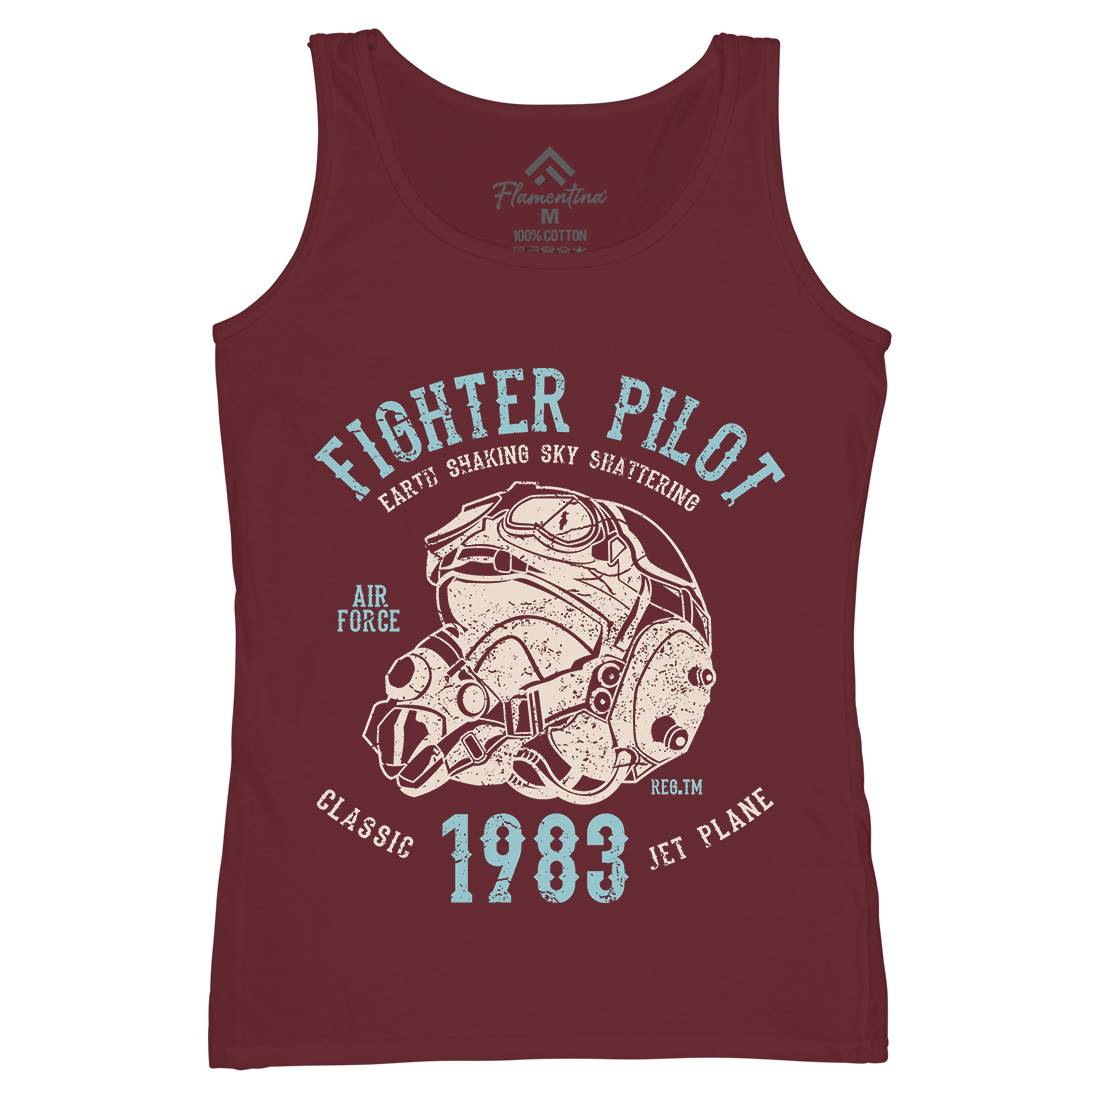 Fighter Pilot Womens Organic Tank Top Vest Army A051